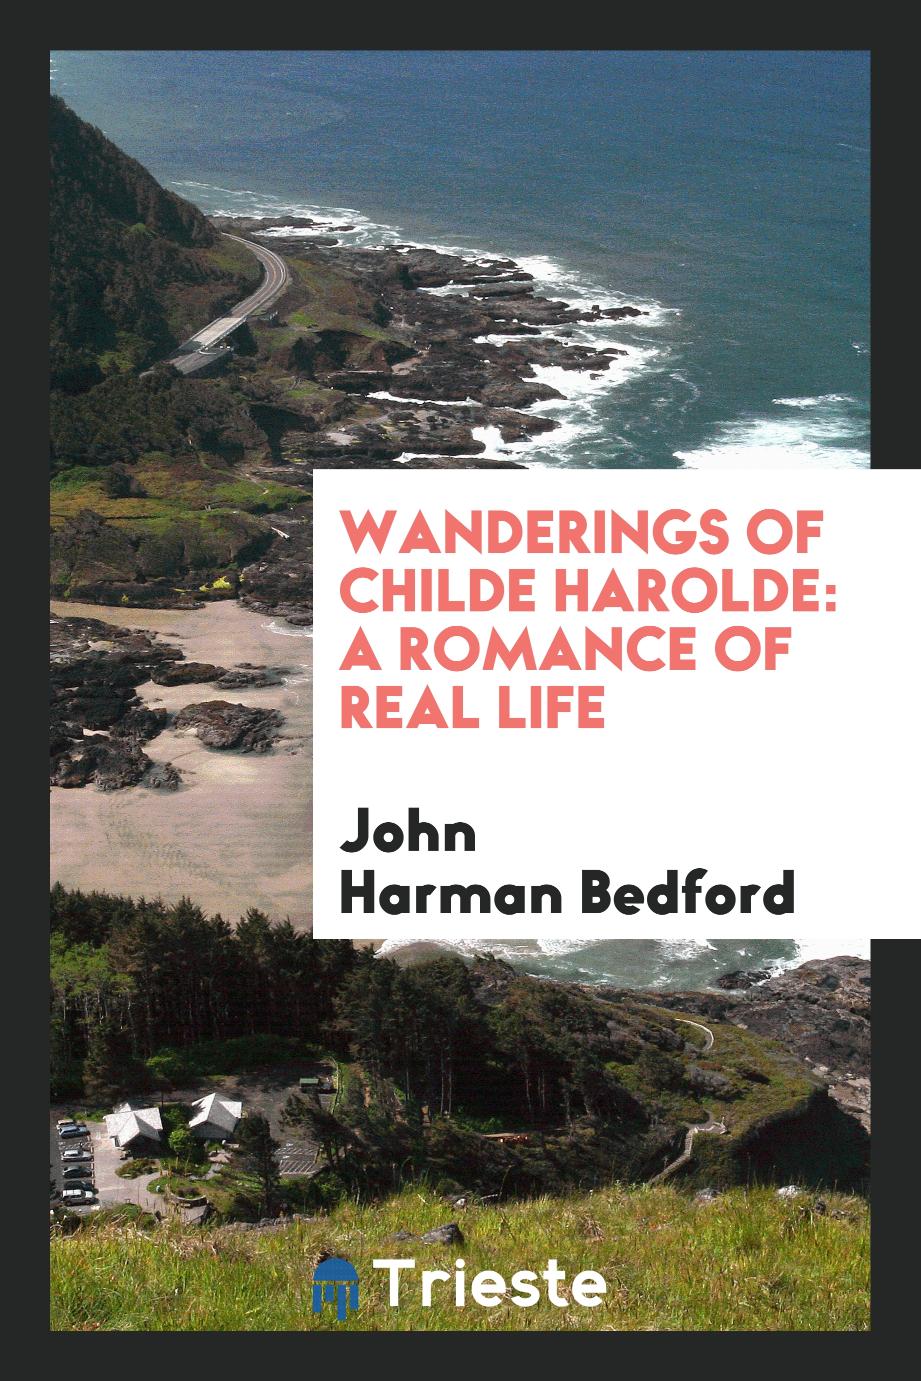 Wanderings of Childe Harolde: a romance of real life